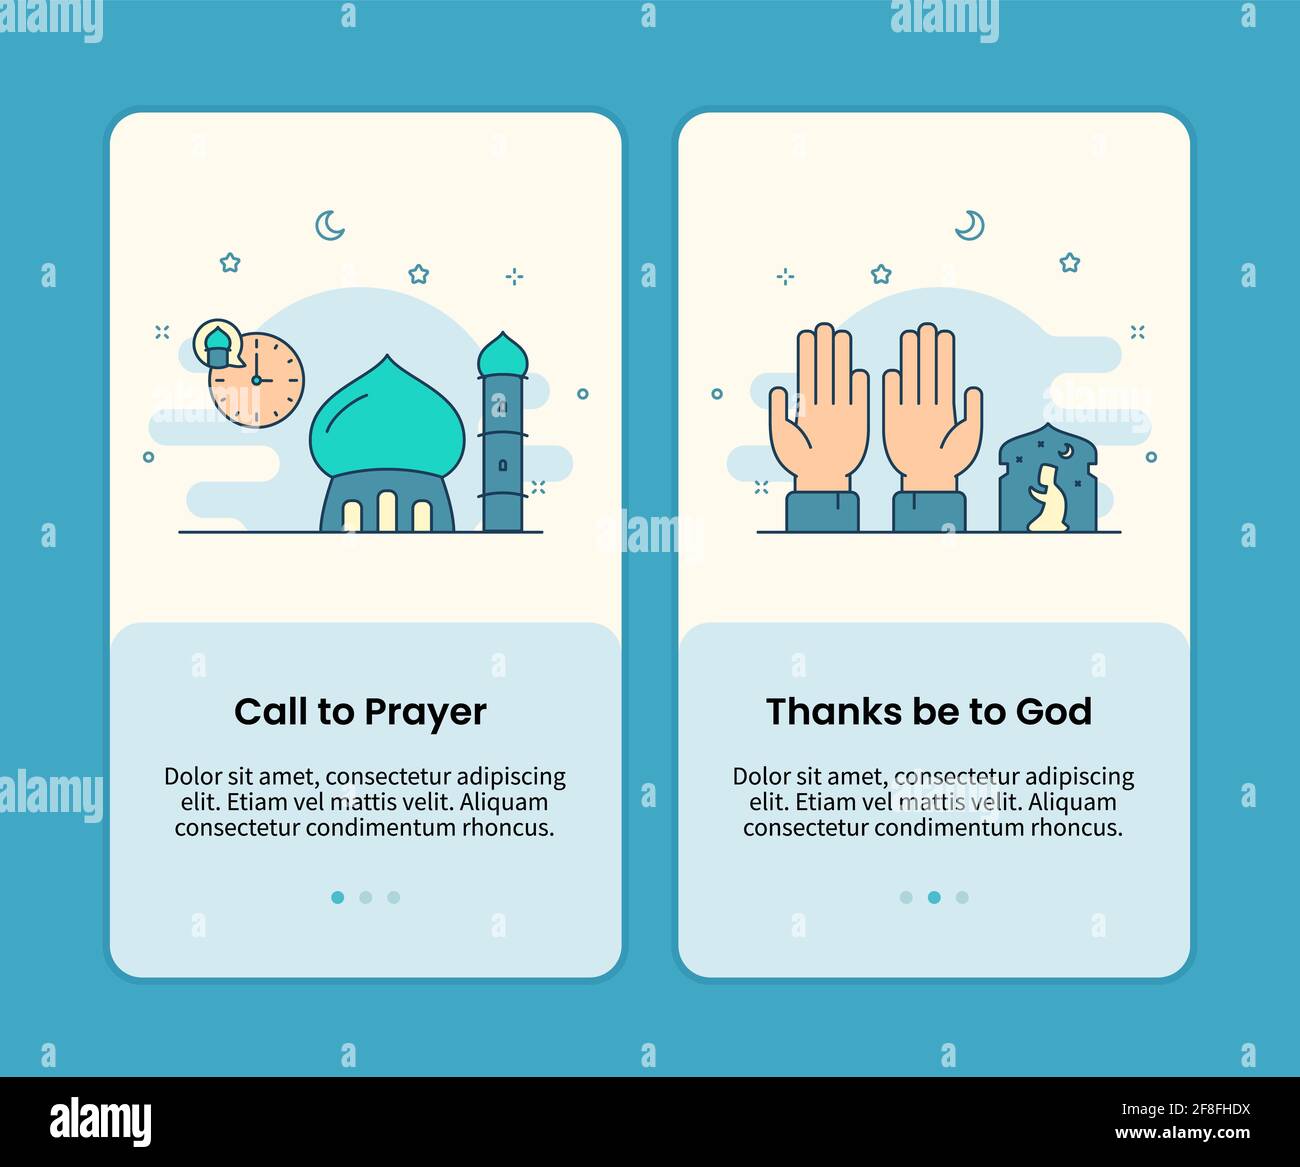 call to prayer and thanks to god design onboarding design mobile page screen app vector illustration Stock Photo